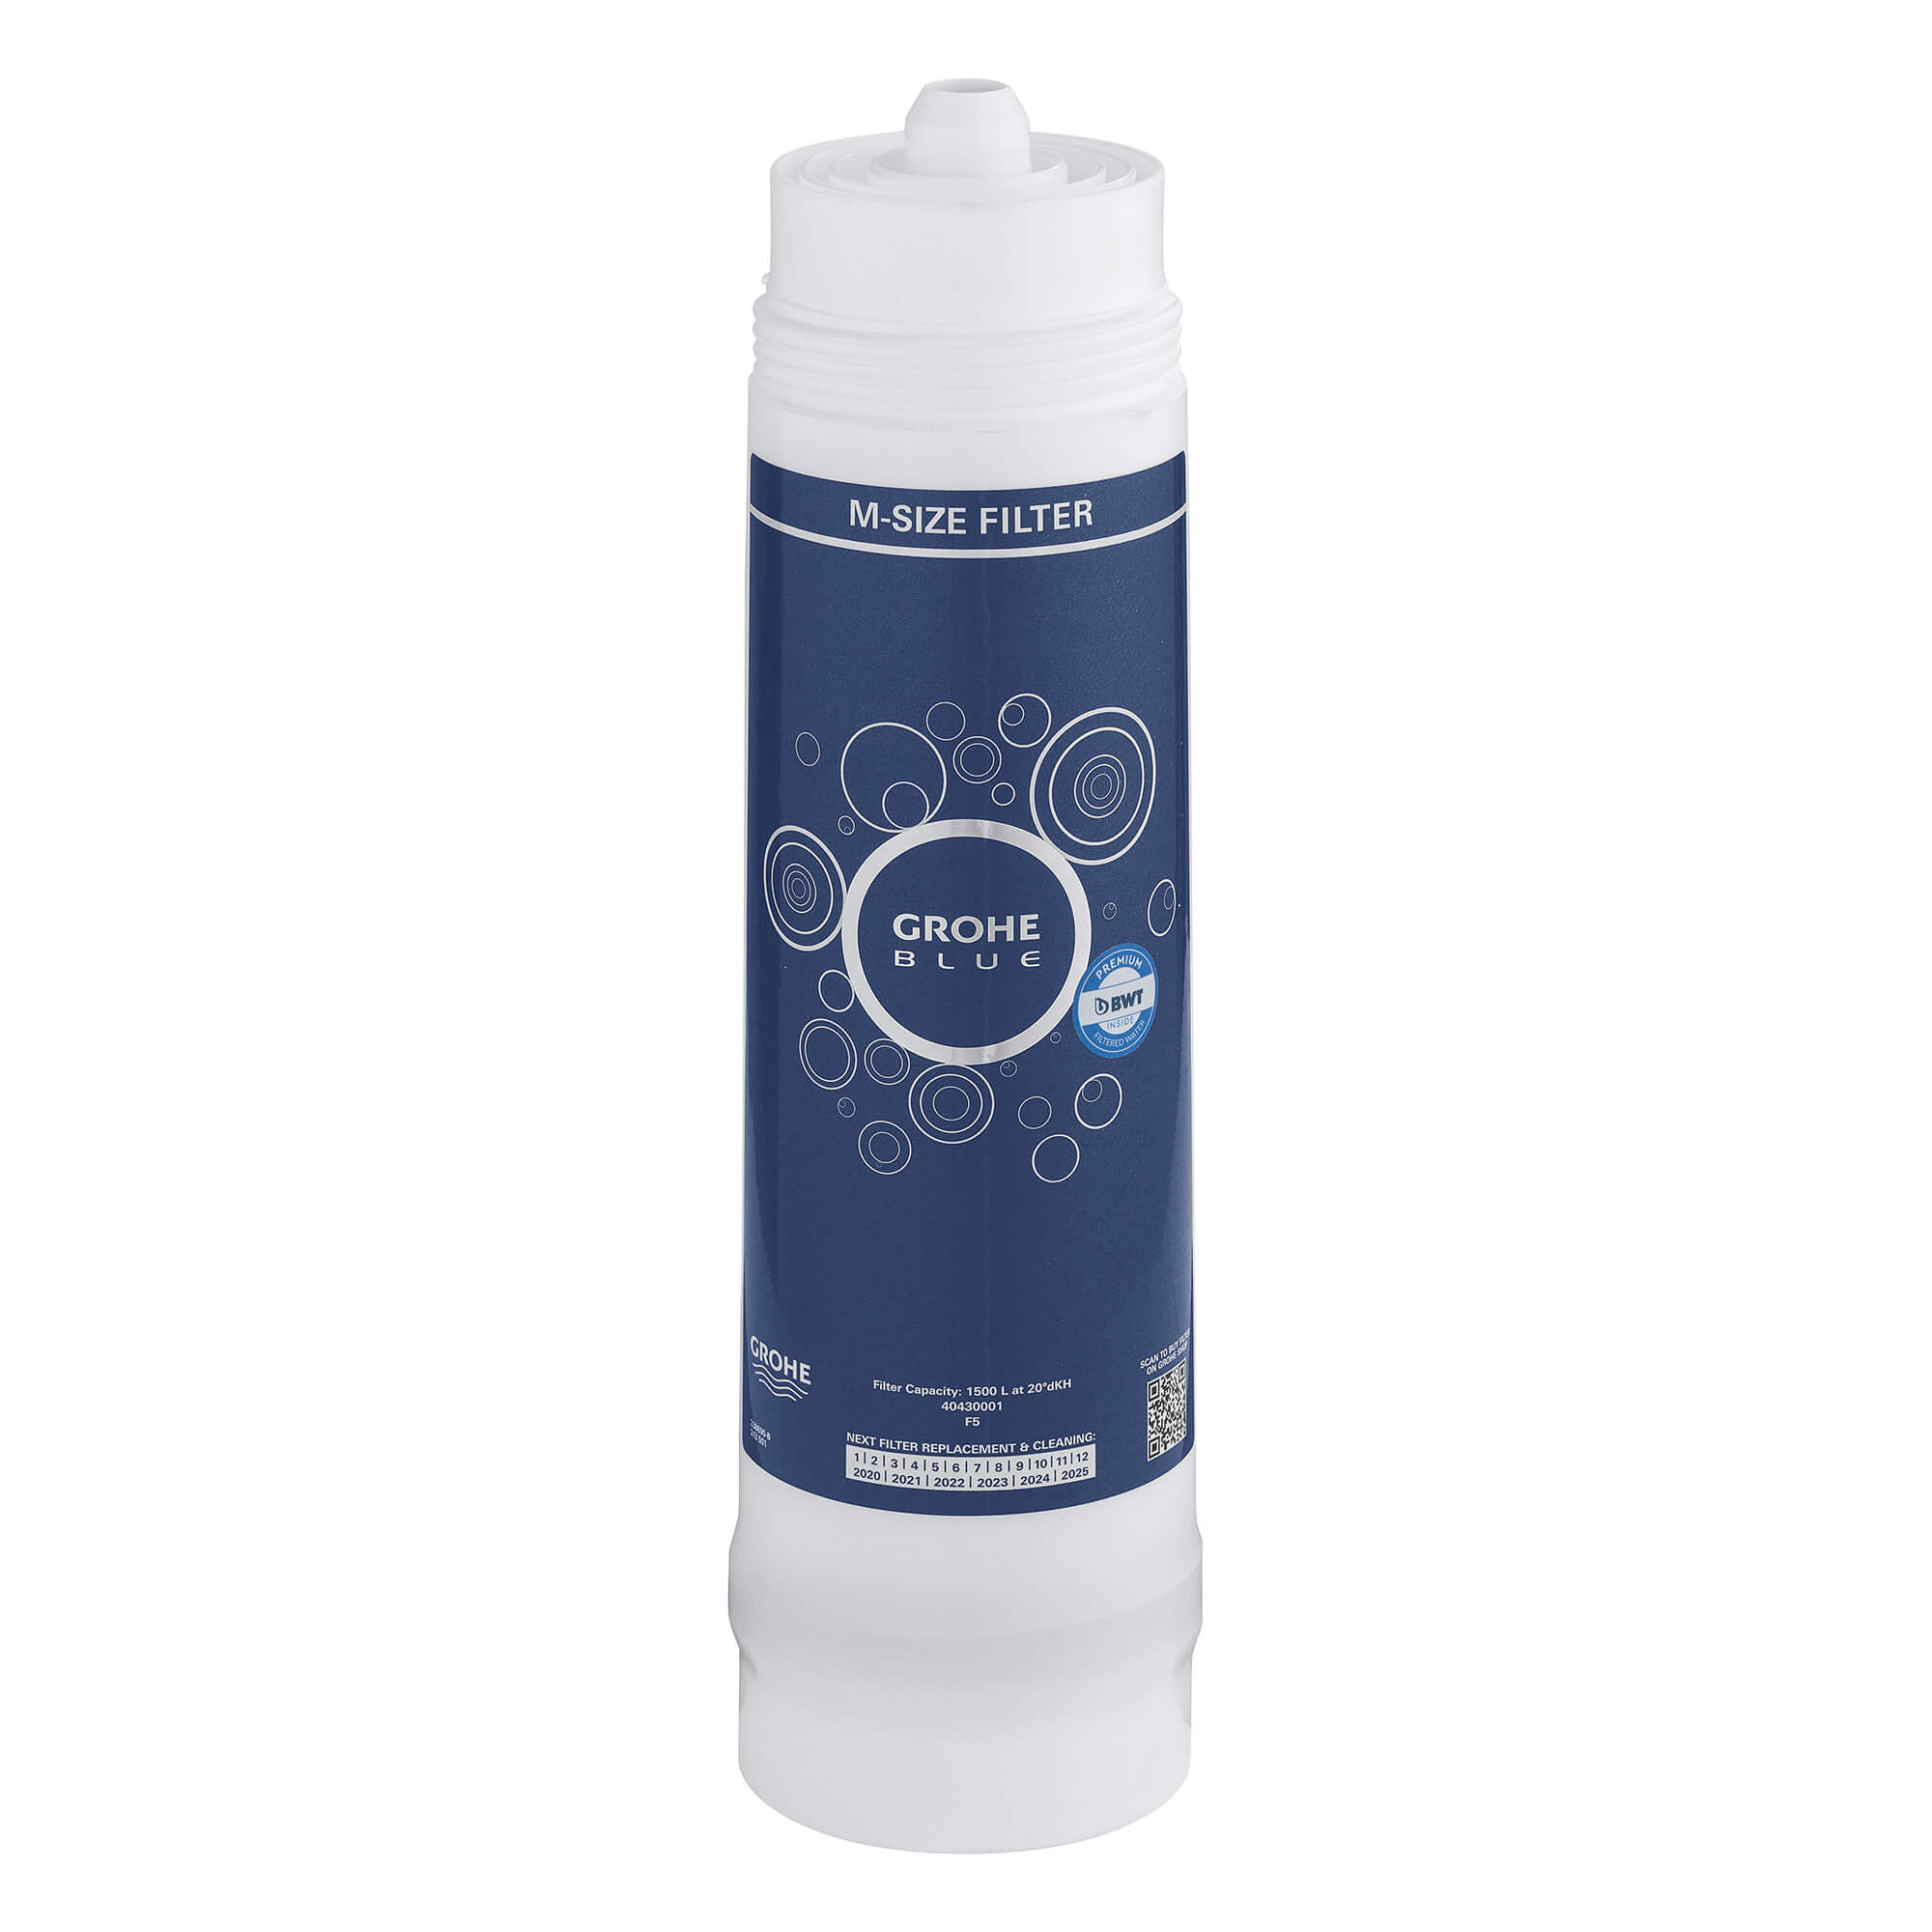 Grohe 40430001 - GROHE Blue® Filter M-Size - Amati Canada